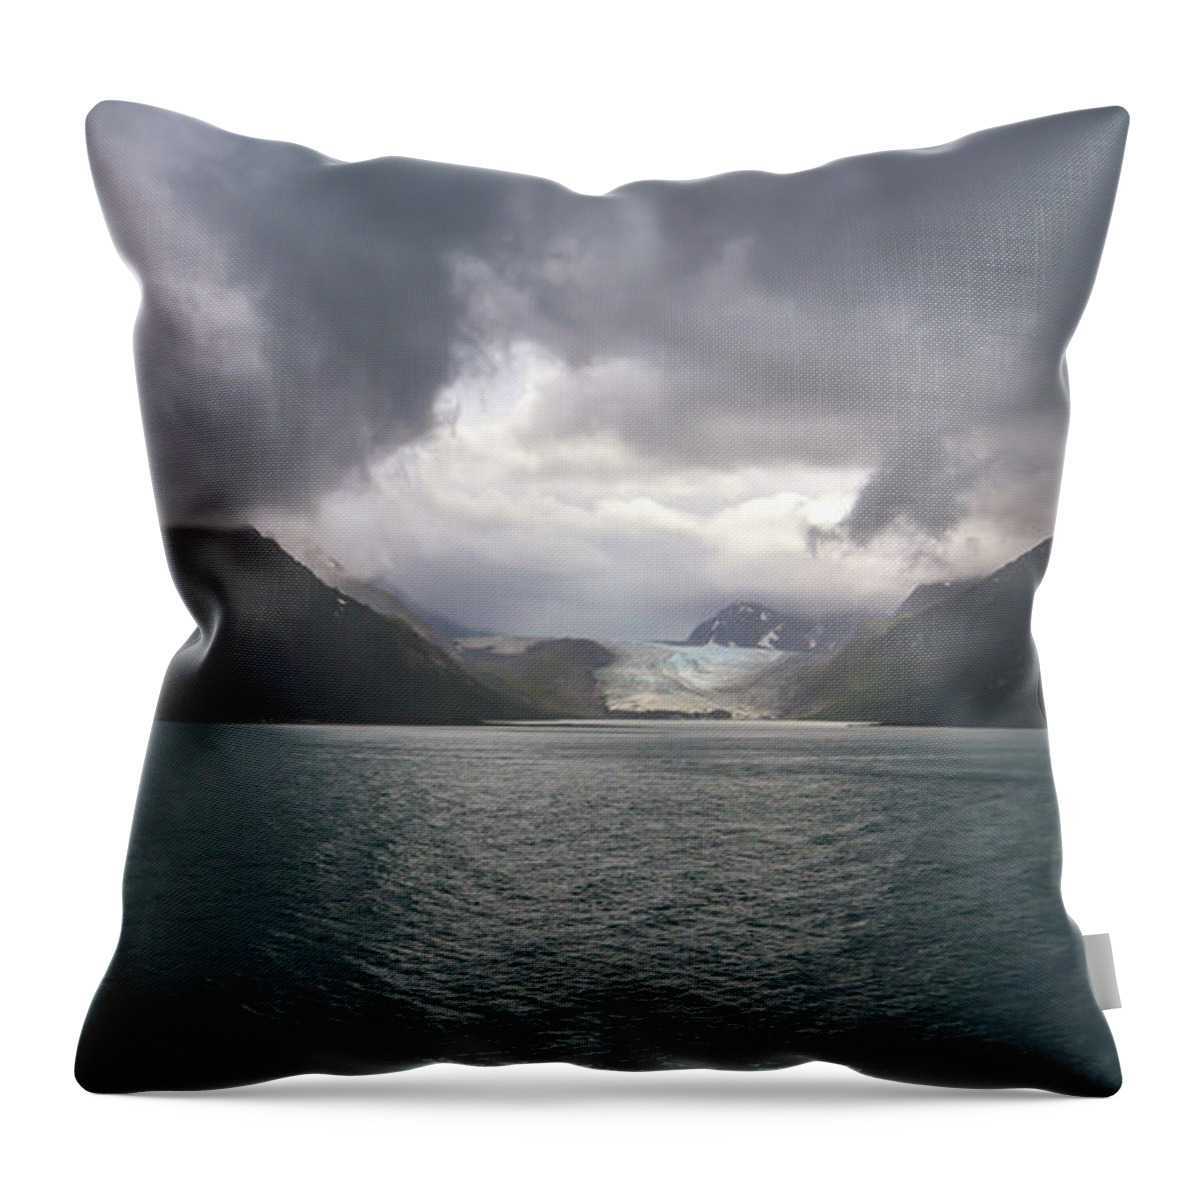 Glacier Bay National Park Throw Pillow featuring the photograph One Morning At Glacier Bay by Ed Williams